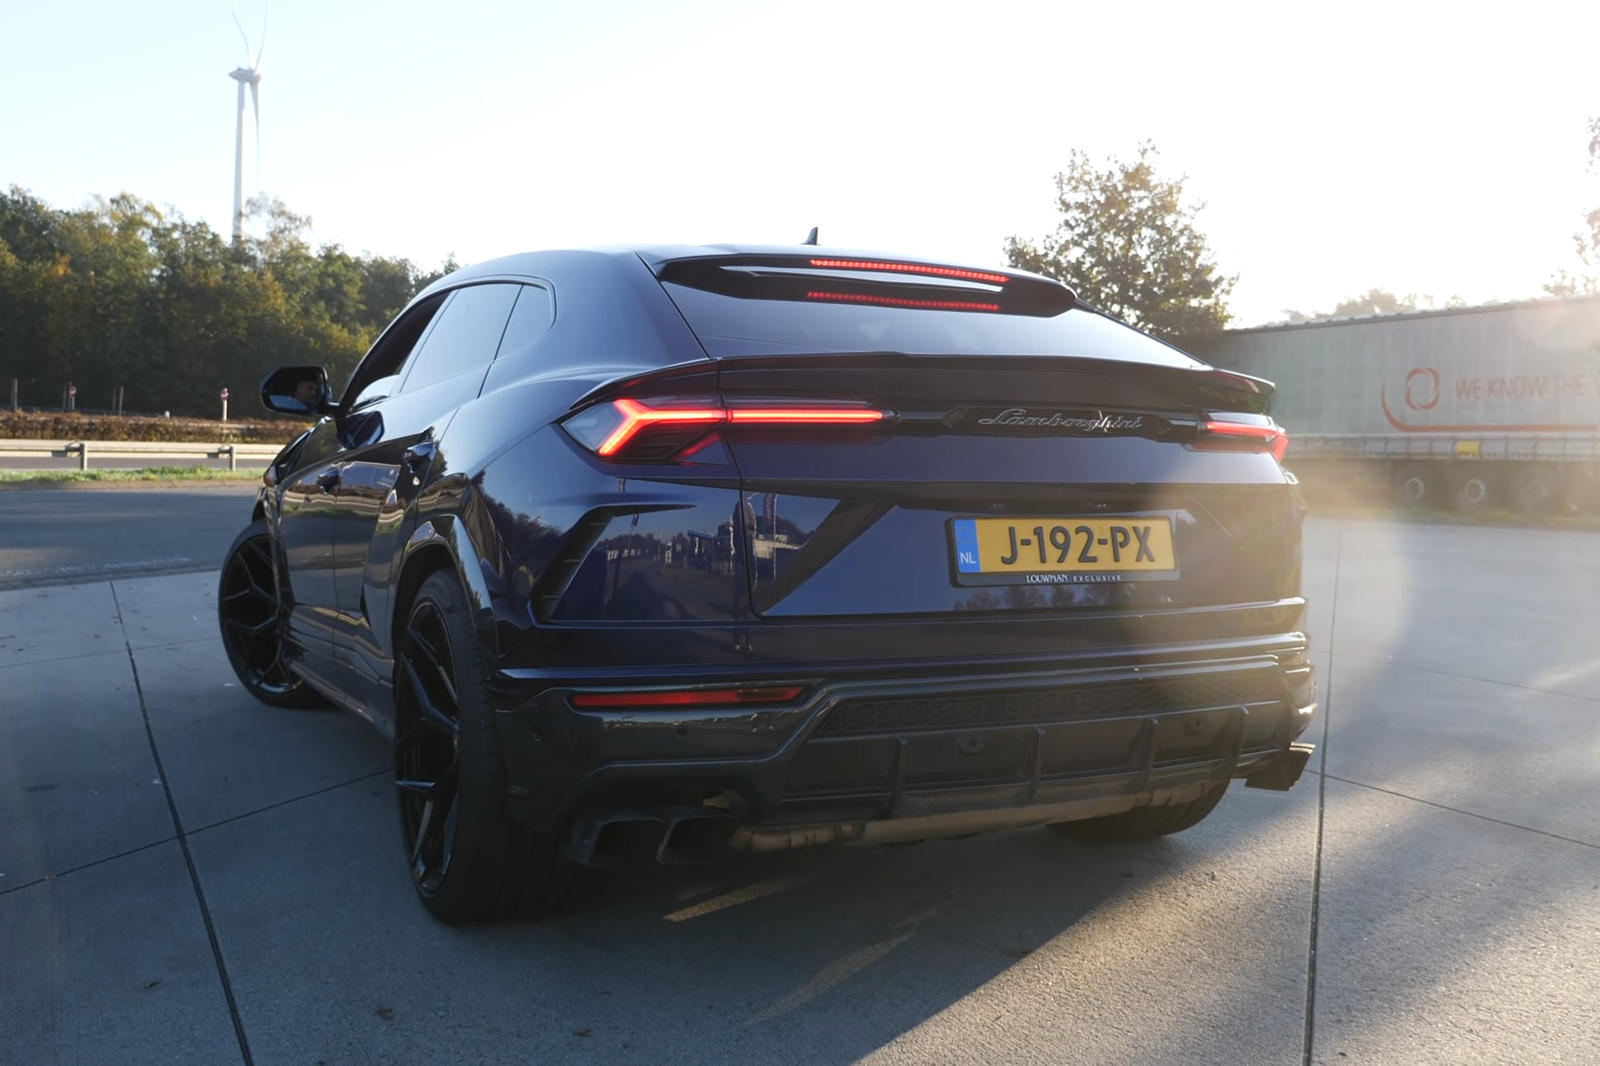 An 840-HP Lamborghini Hit Over 200 MPH On The Autobahn | CarBuzz